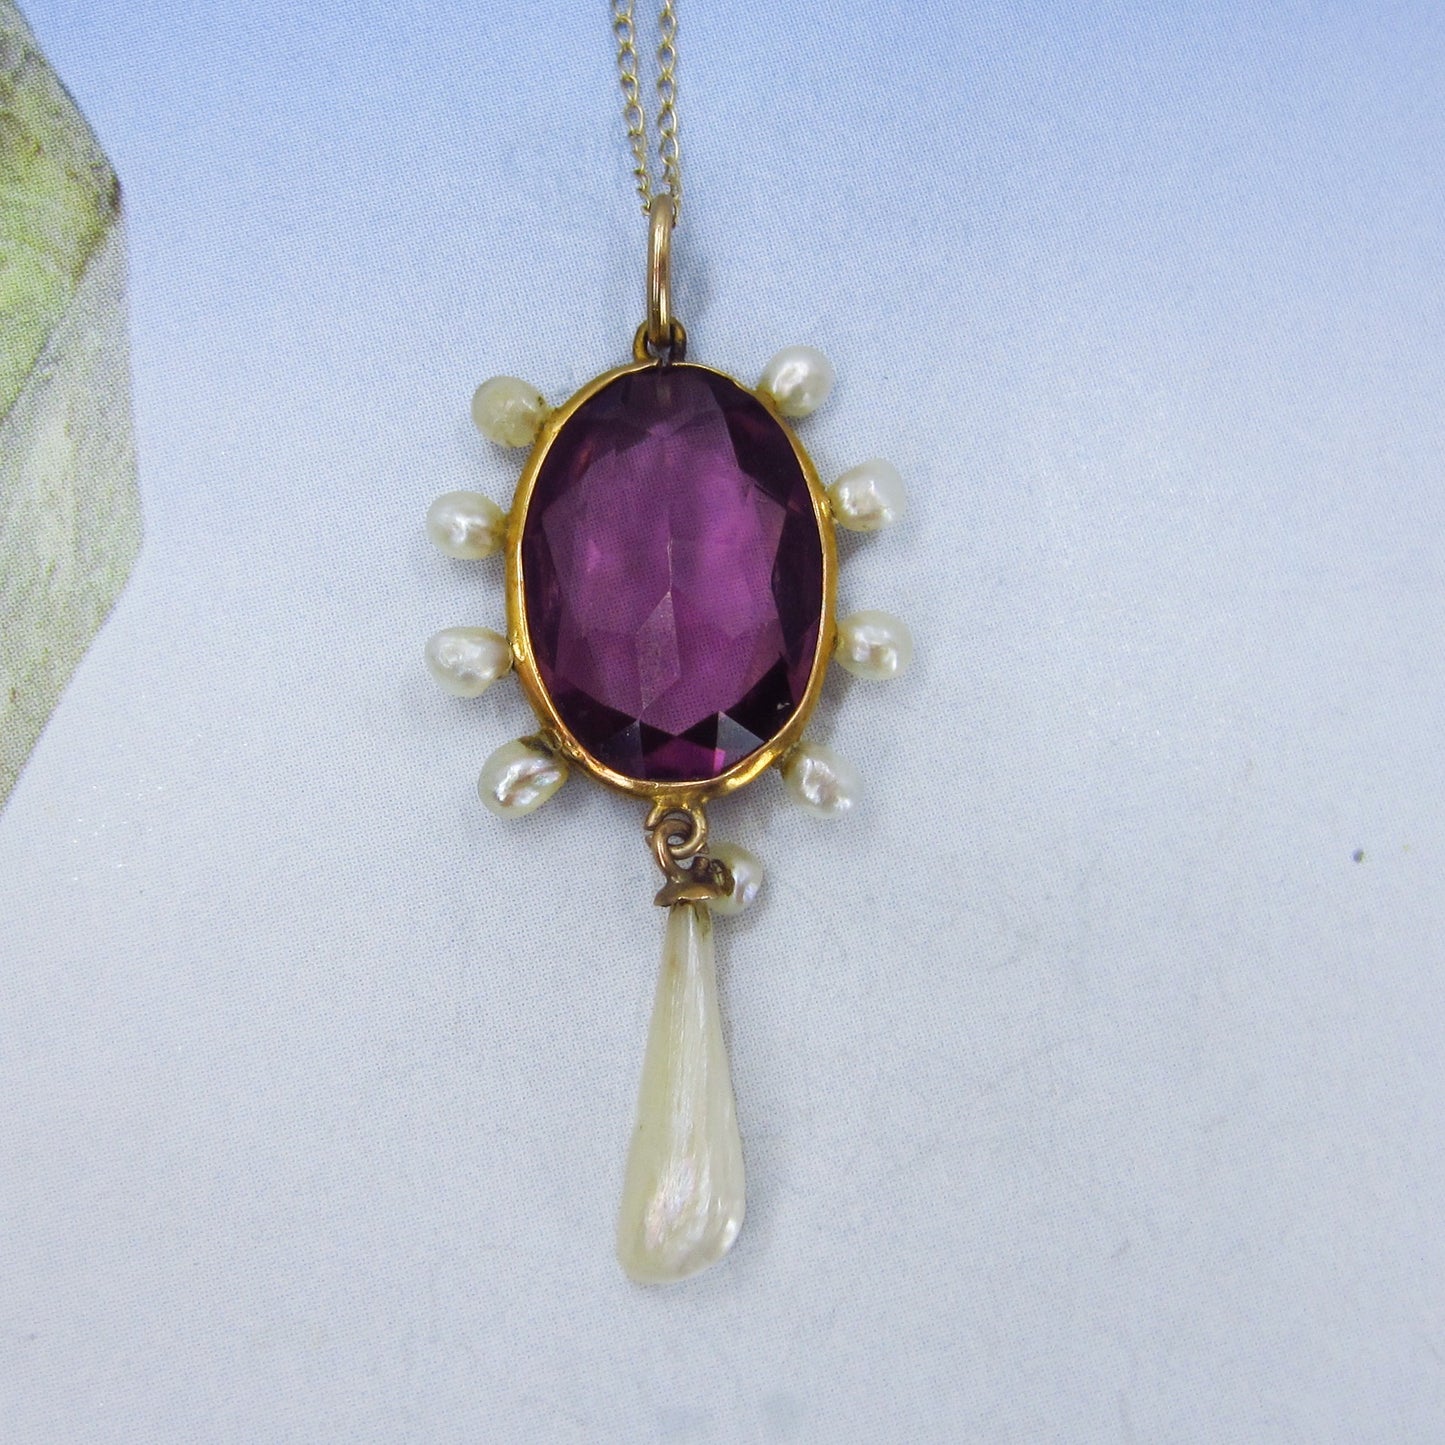 SOLD-Edwardian Amethyst and Pearl Pendant 14k c. 1900